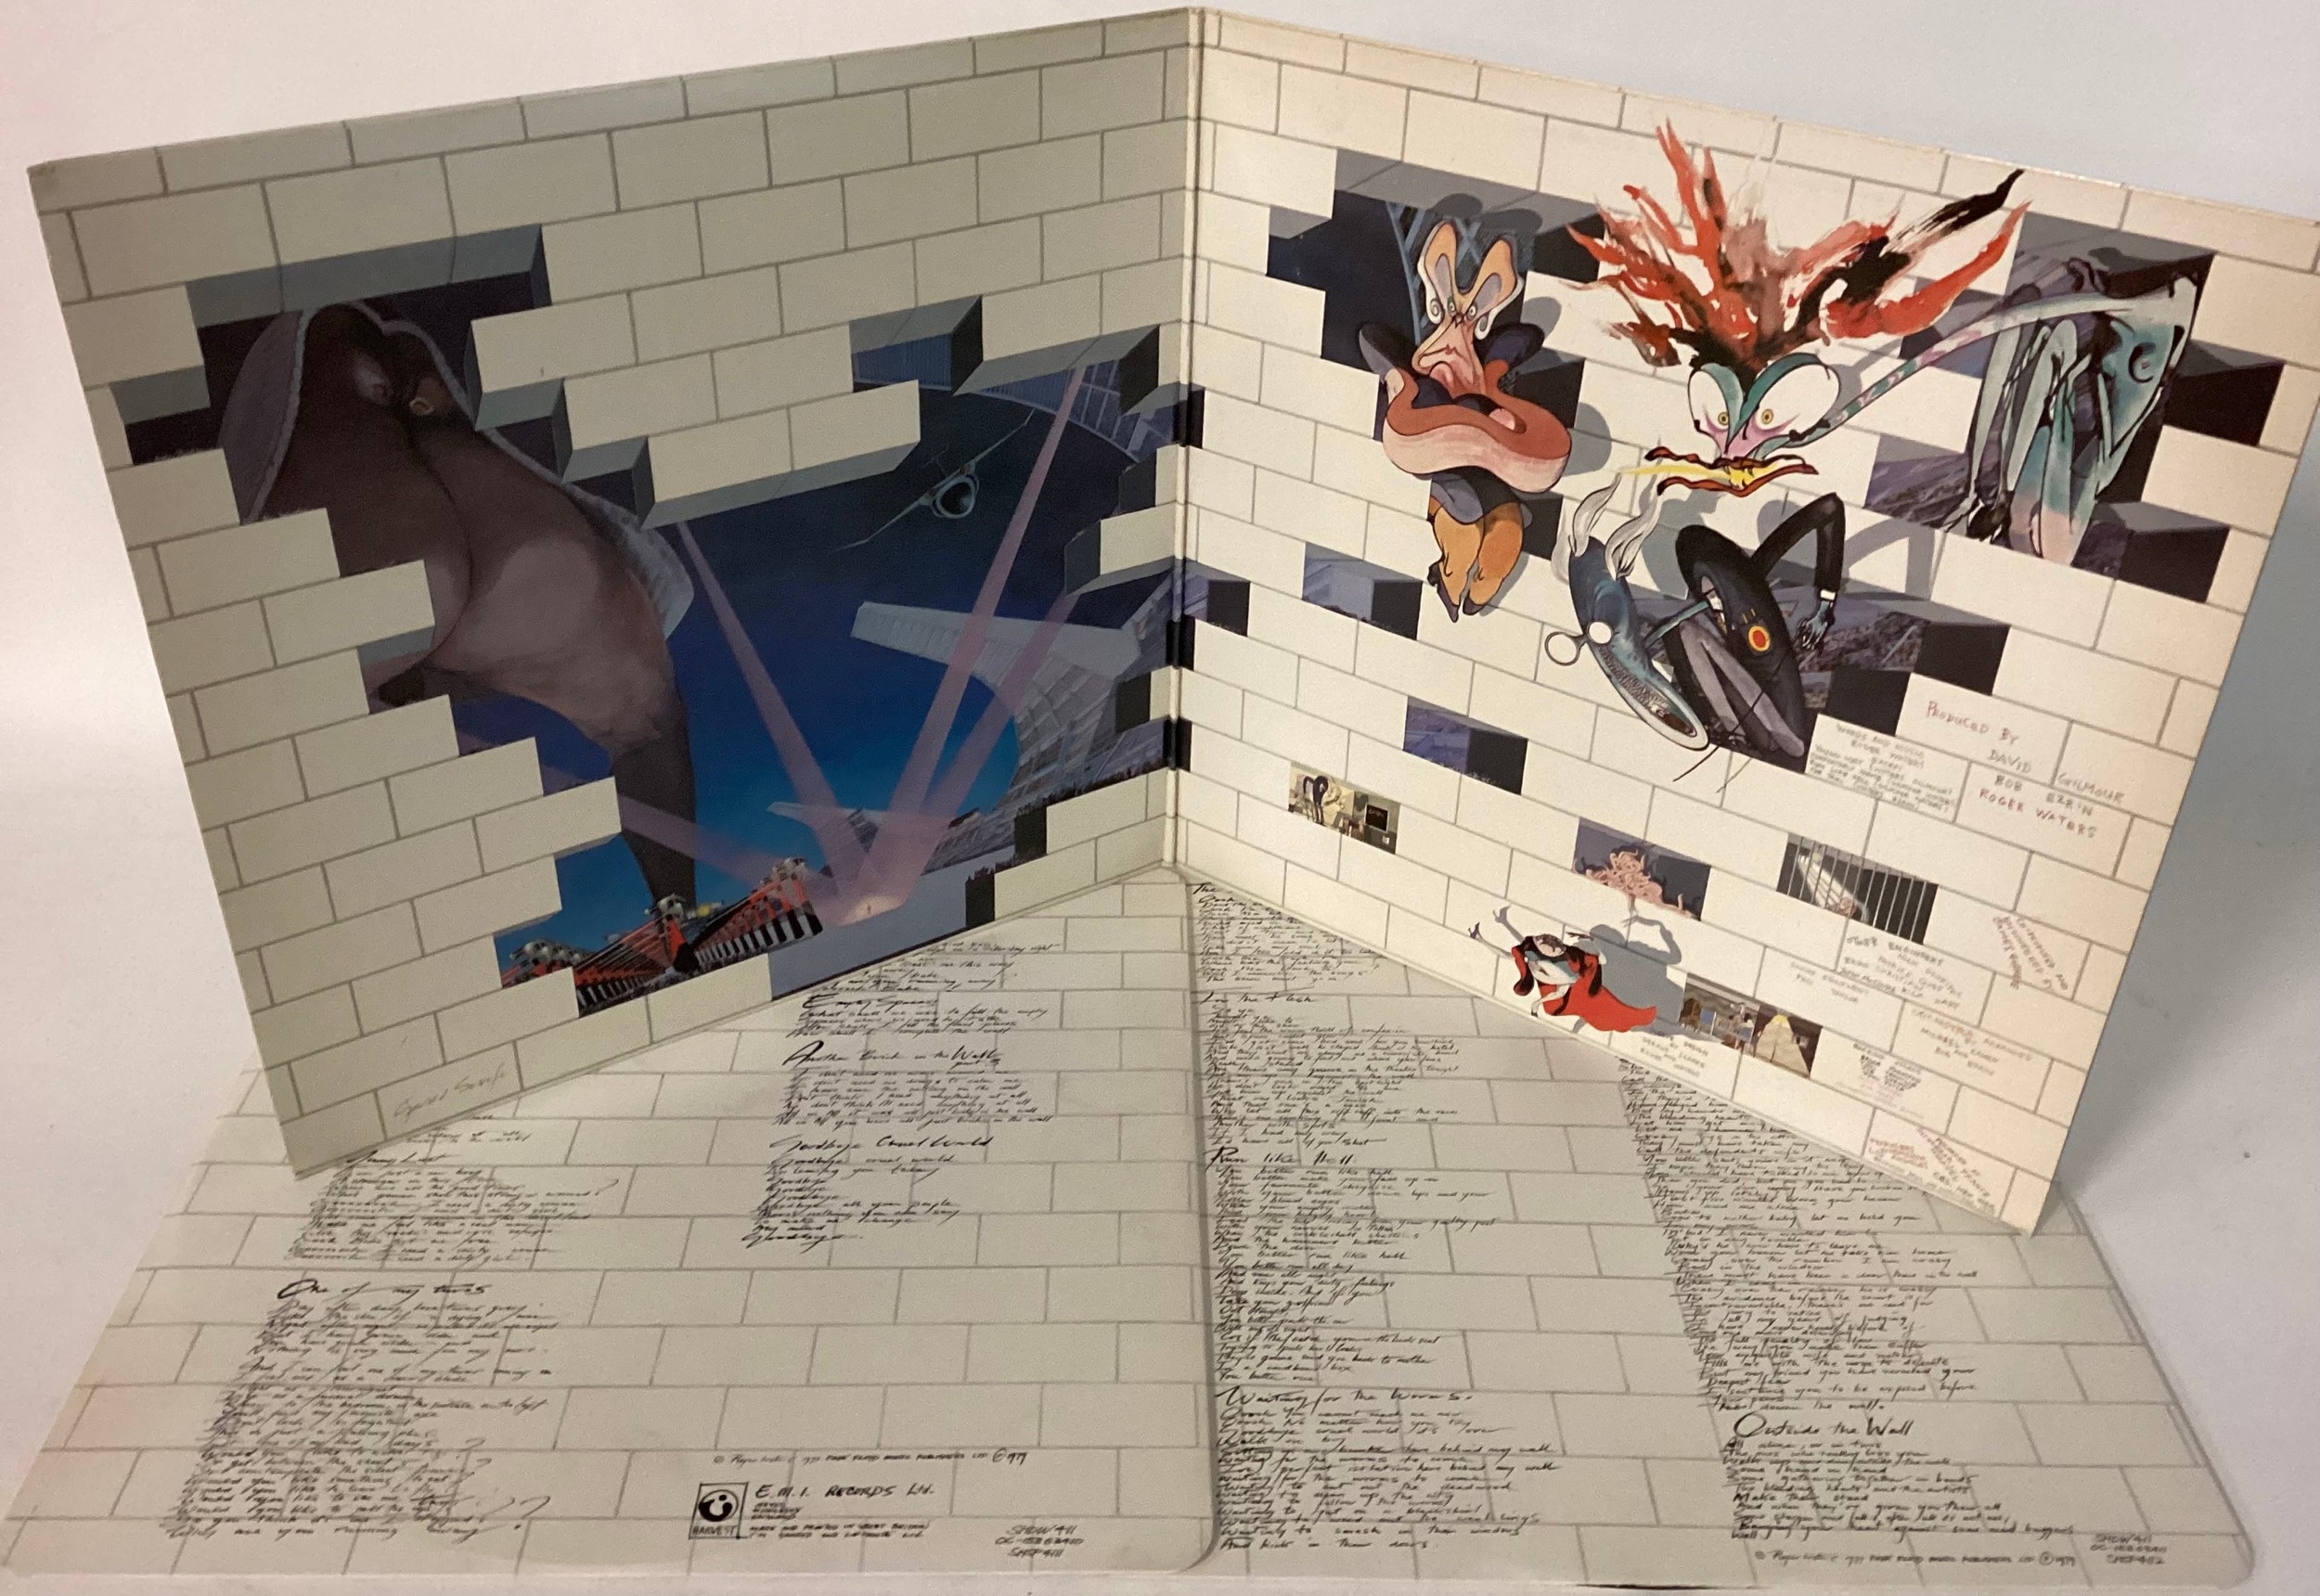 PINK FLOYD VINYL ALBUMS AND PROGRAMMES. Here we find a copy of ‘The Wall’ vinyl album on Harvest - Image 2 of 3